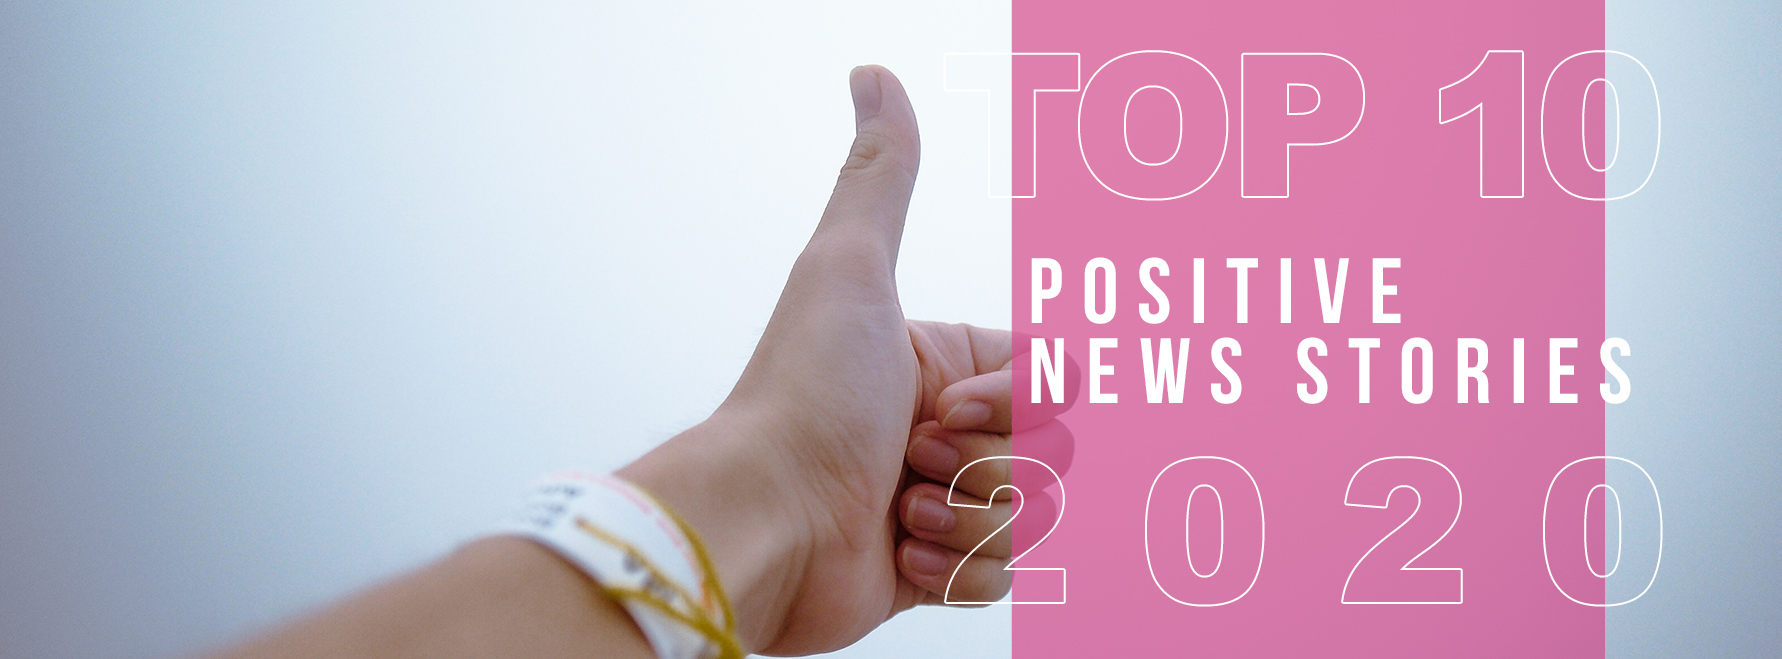 Top 10 positive news stories of 2020